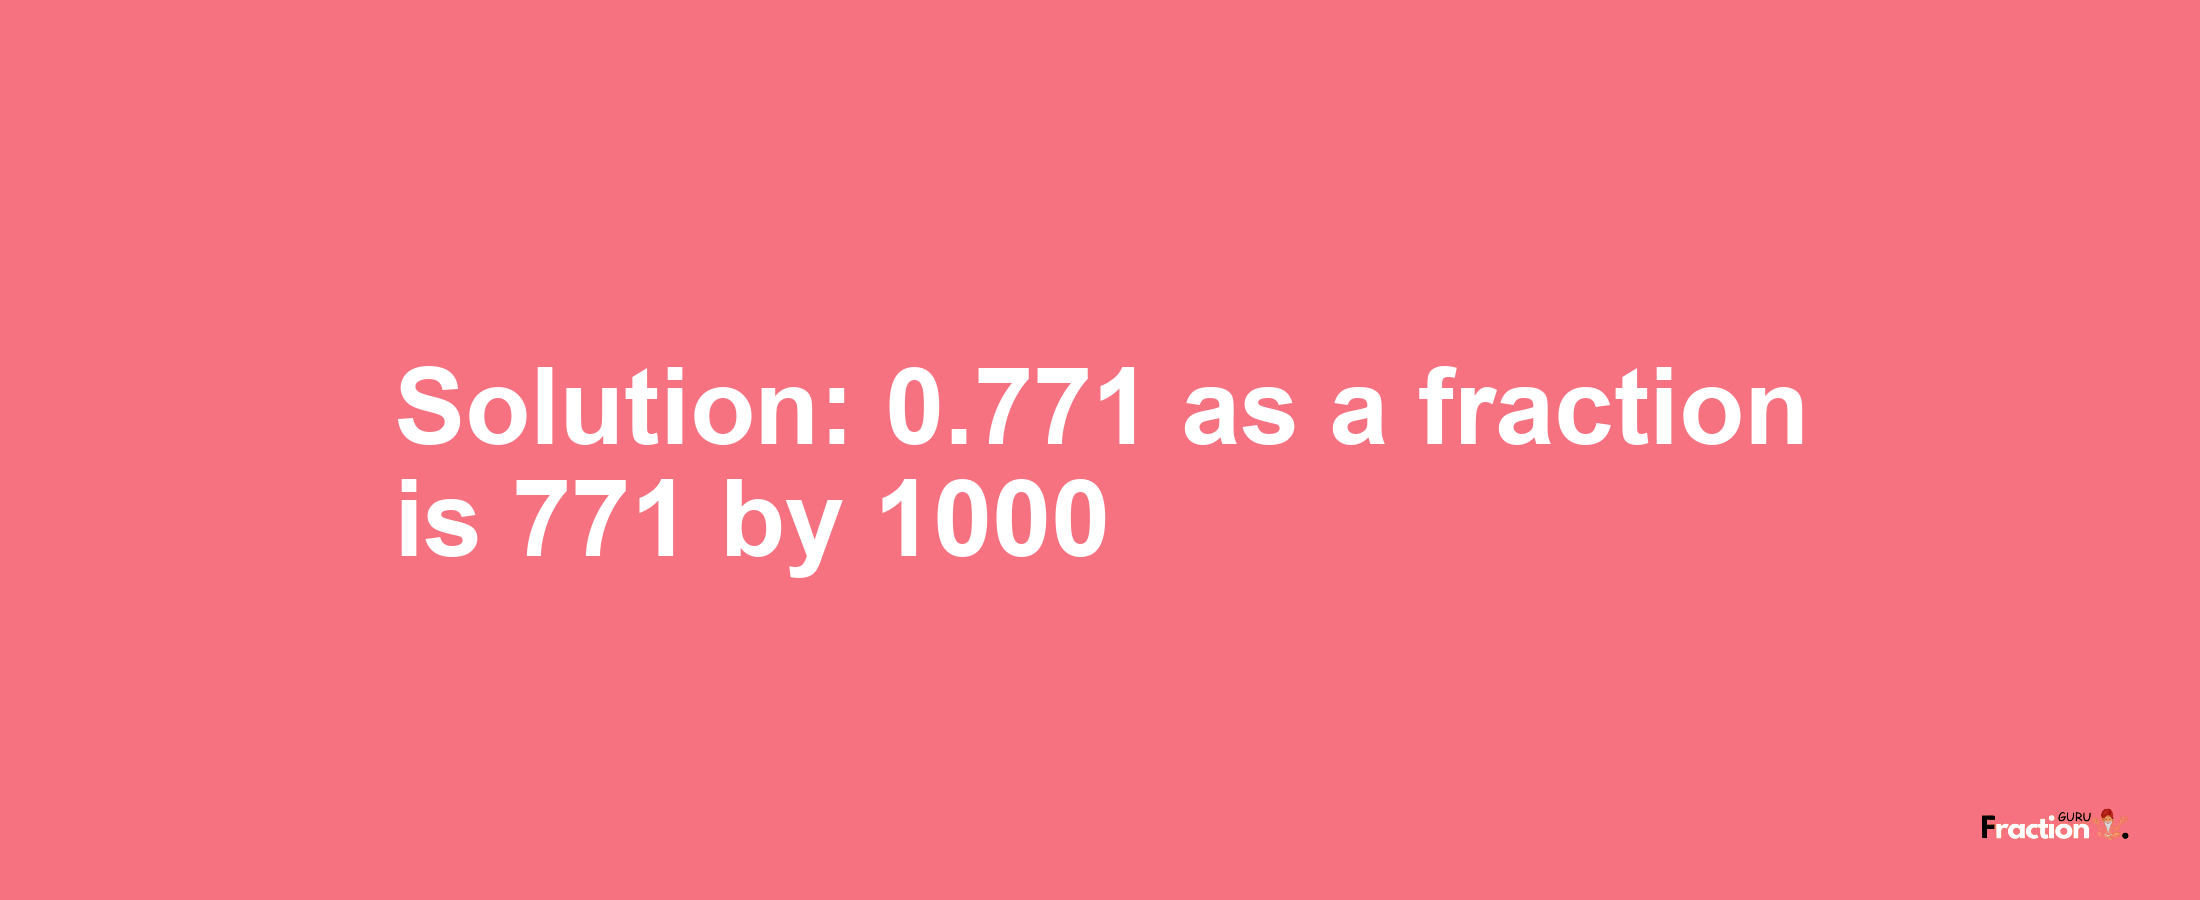 Solution:0.771 as a fraction is 771/1000